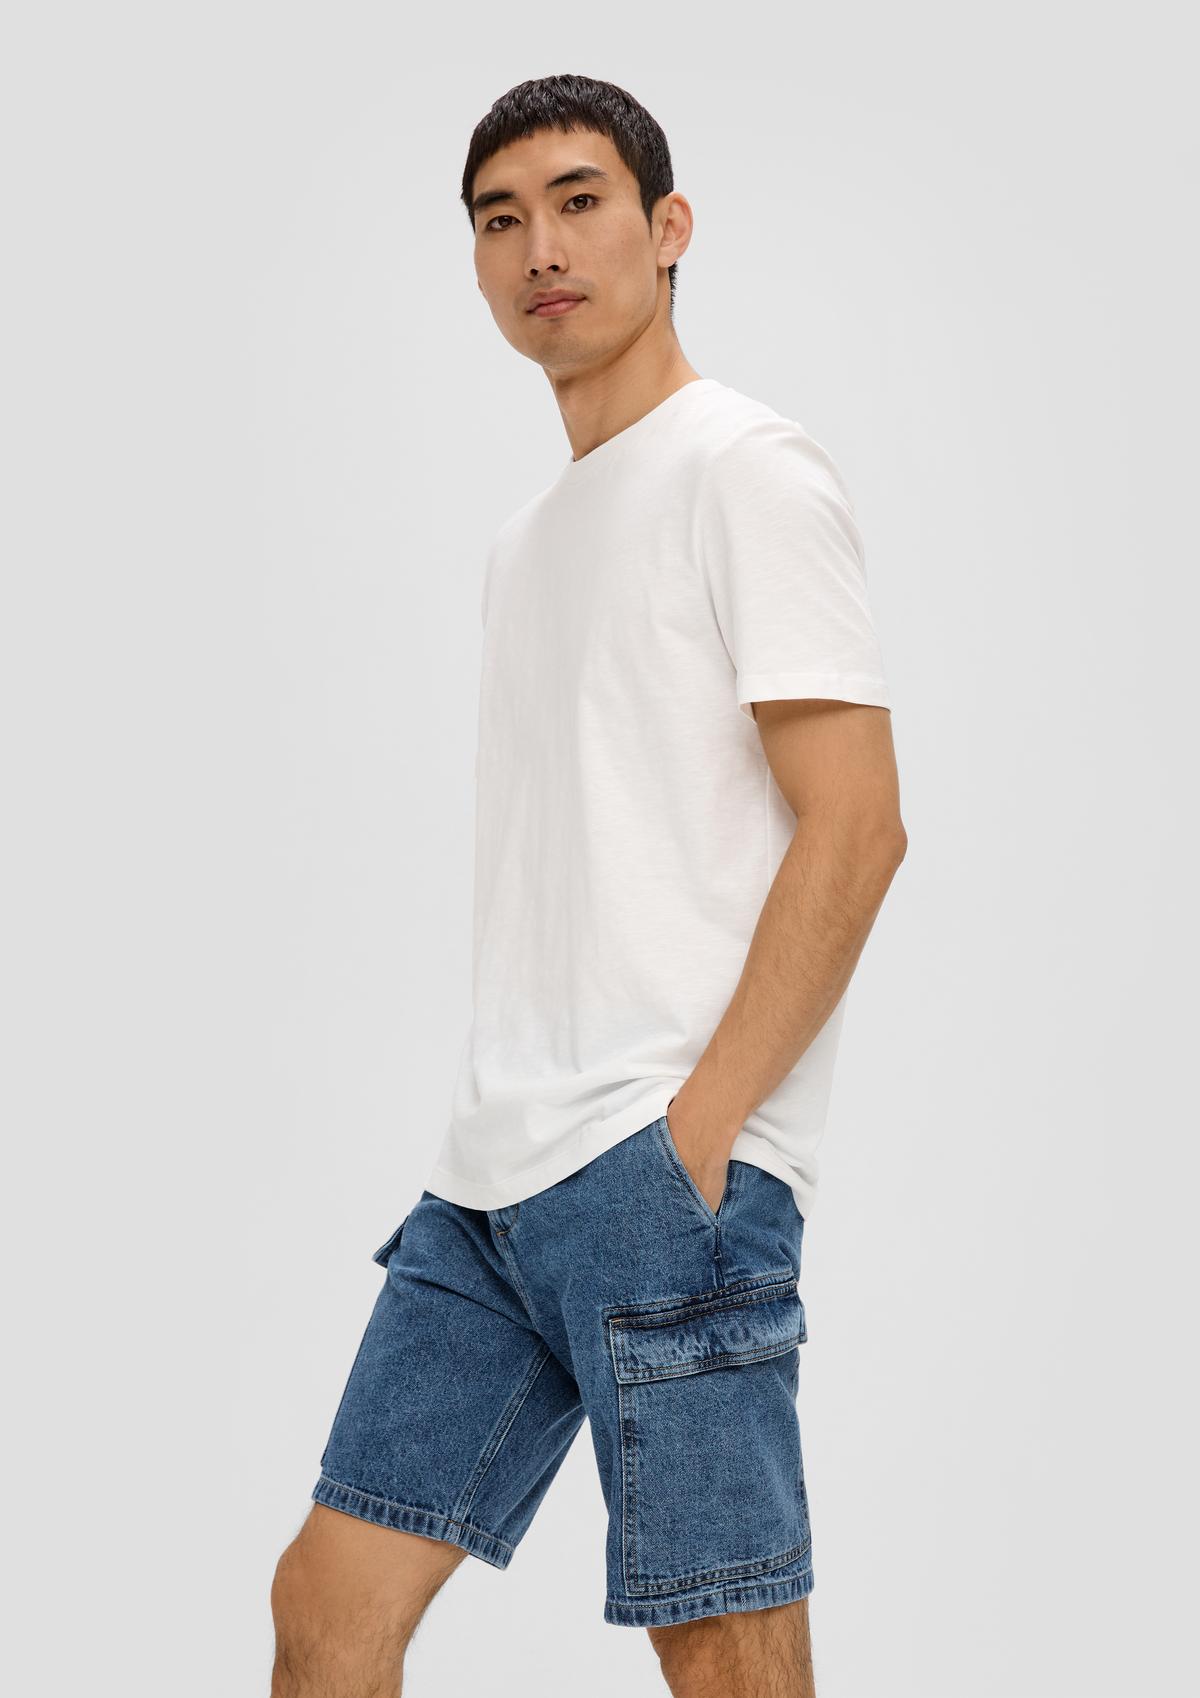 Jeans-Shorts / Regular Fit / High Rise